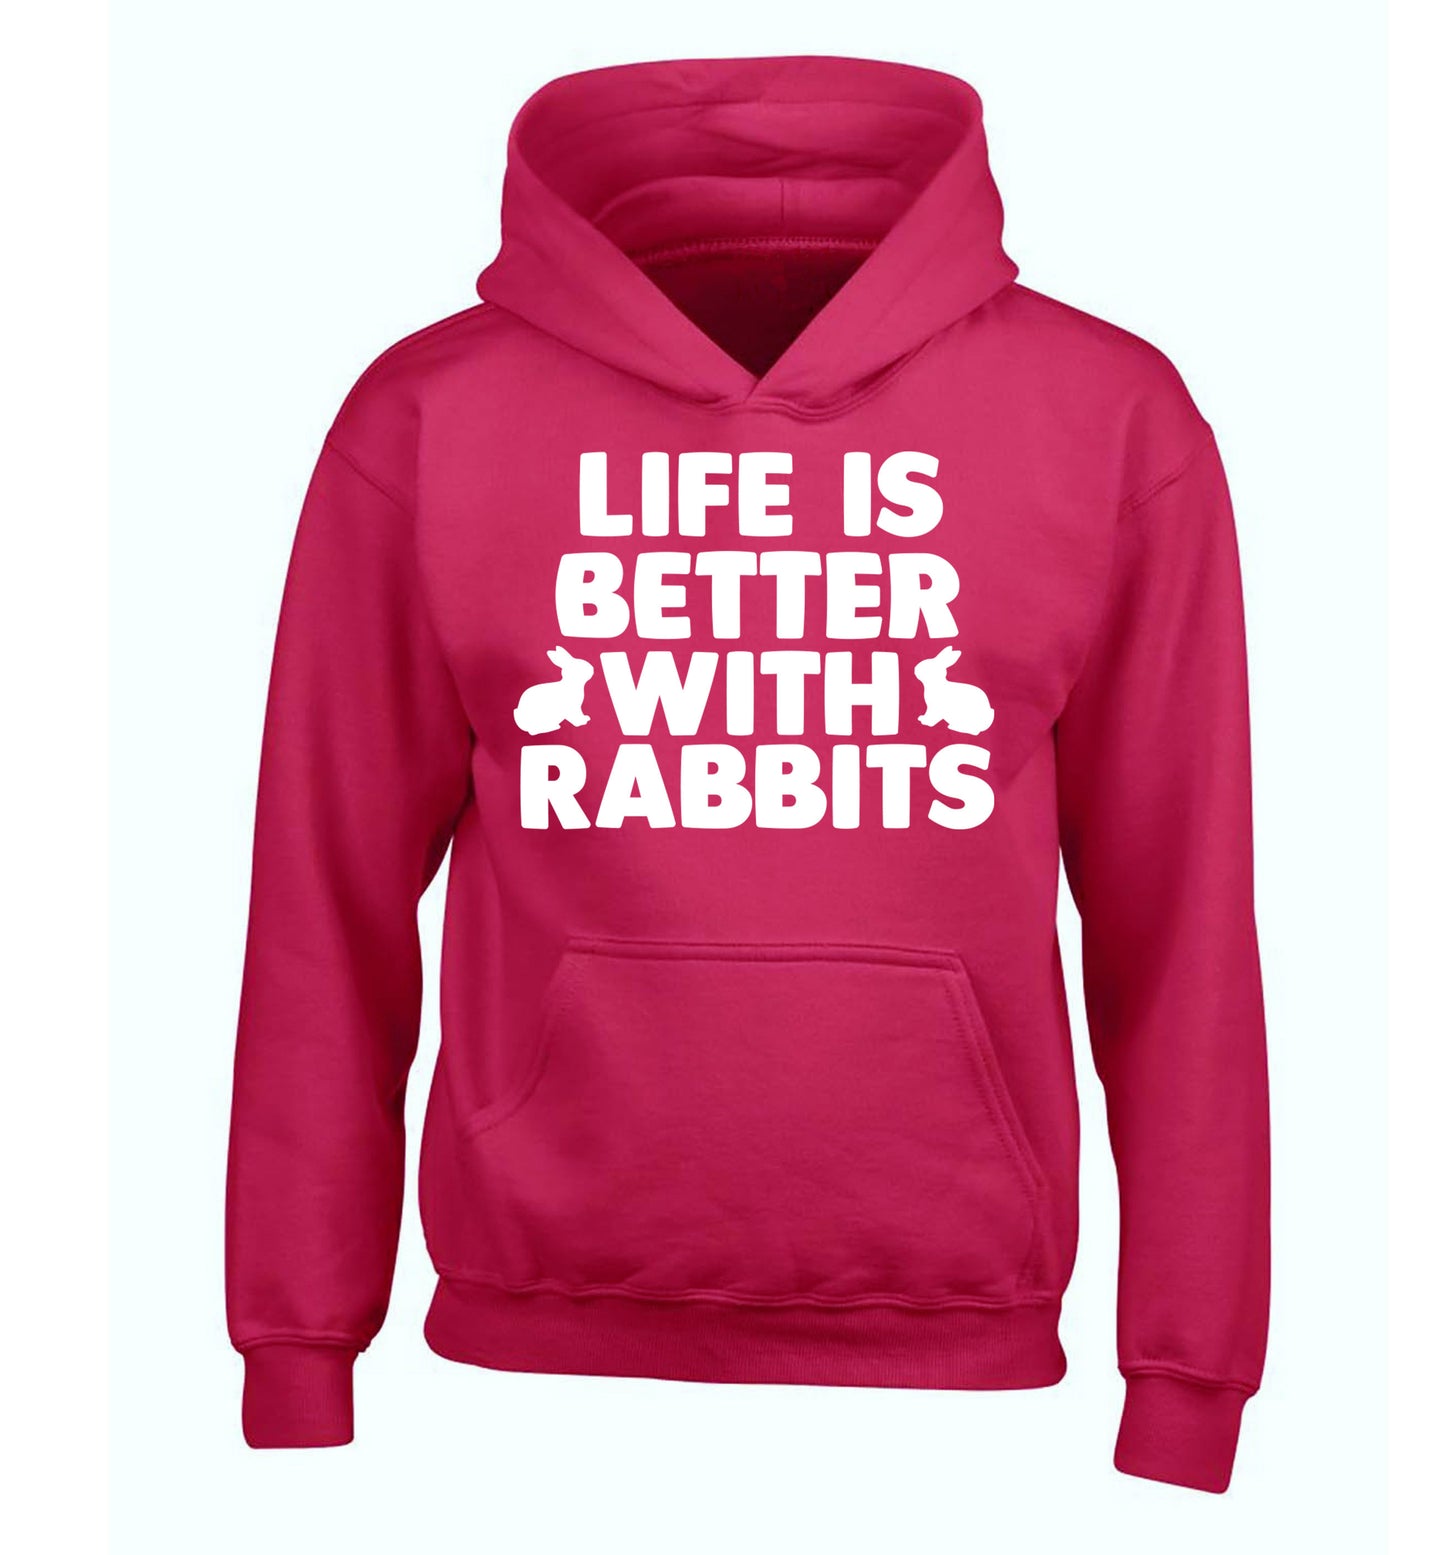 Life is better with rabbits children's pink hoodie 12-14 Years